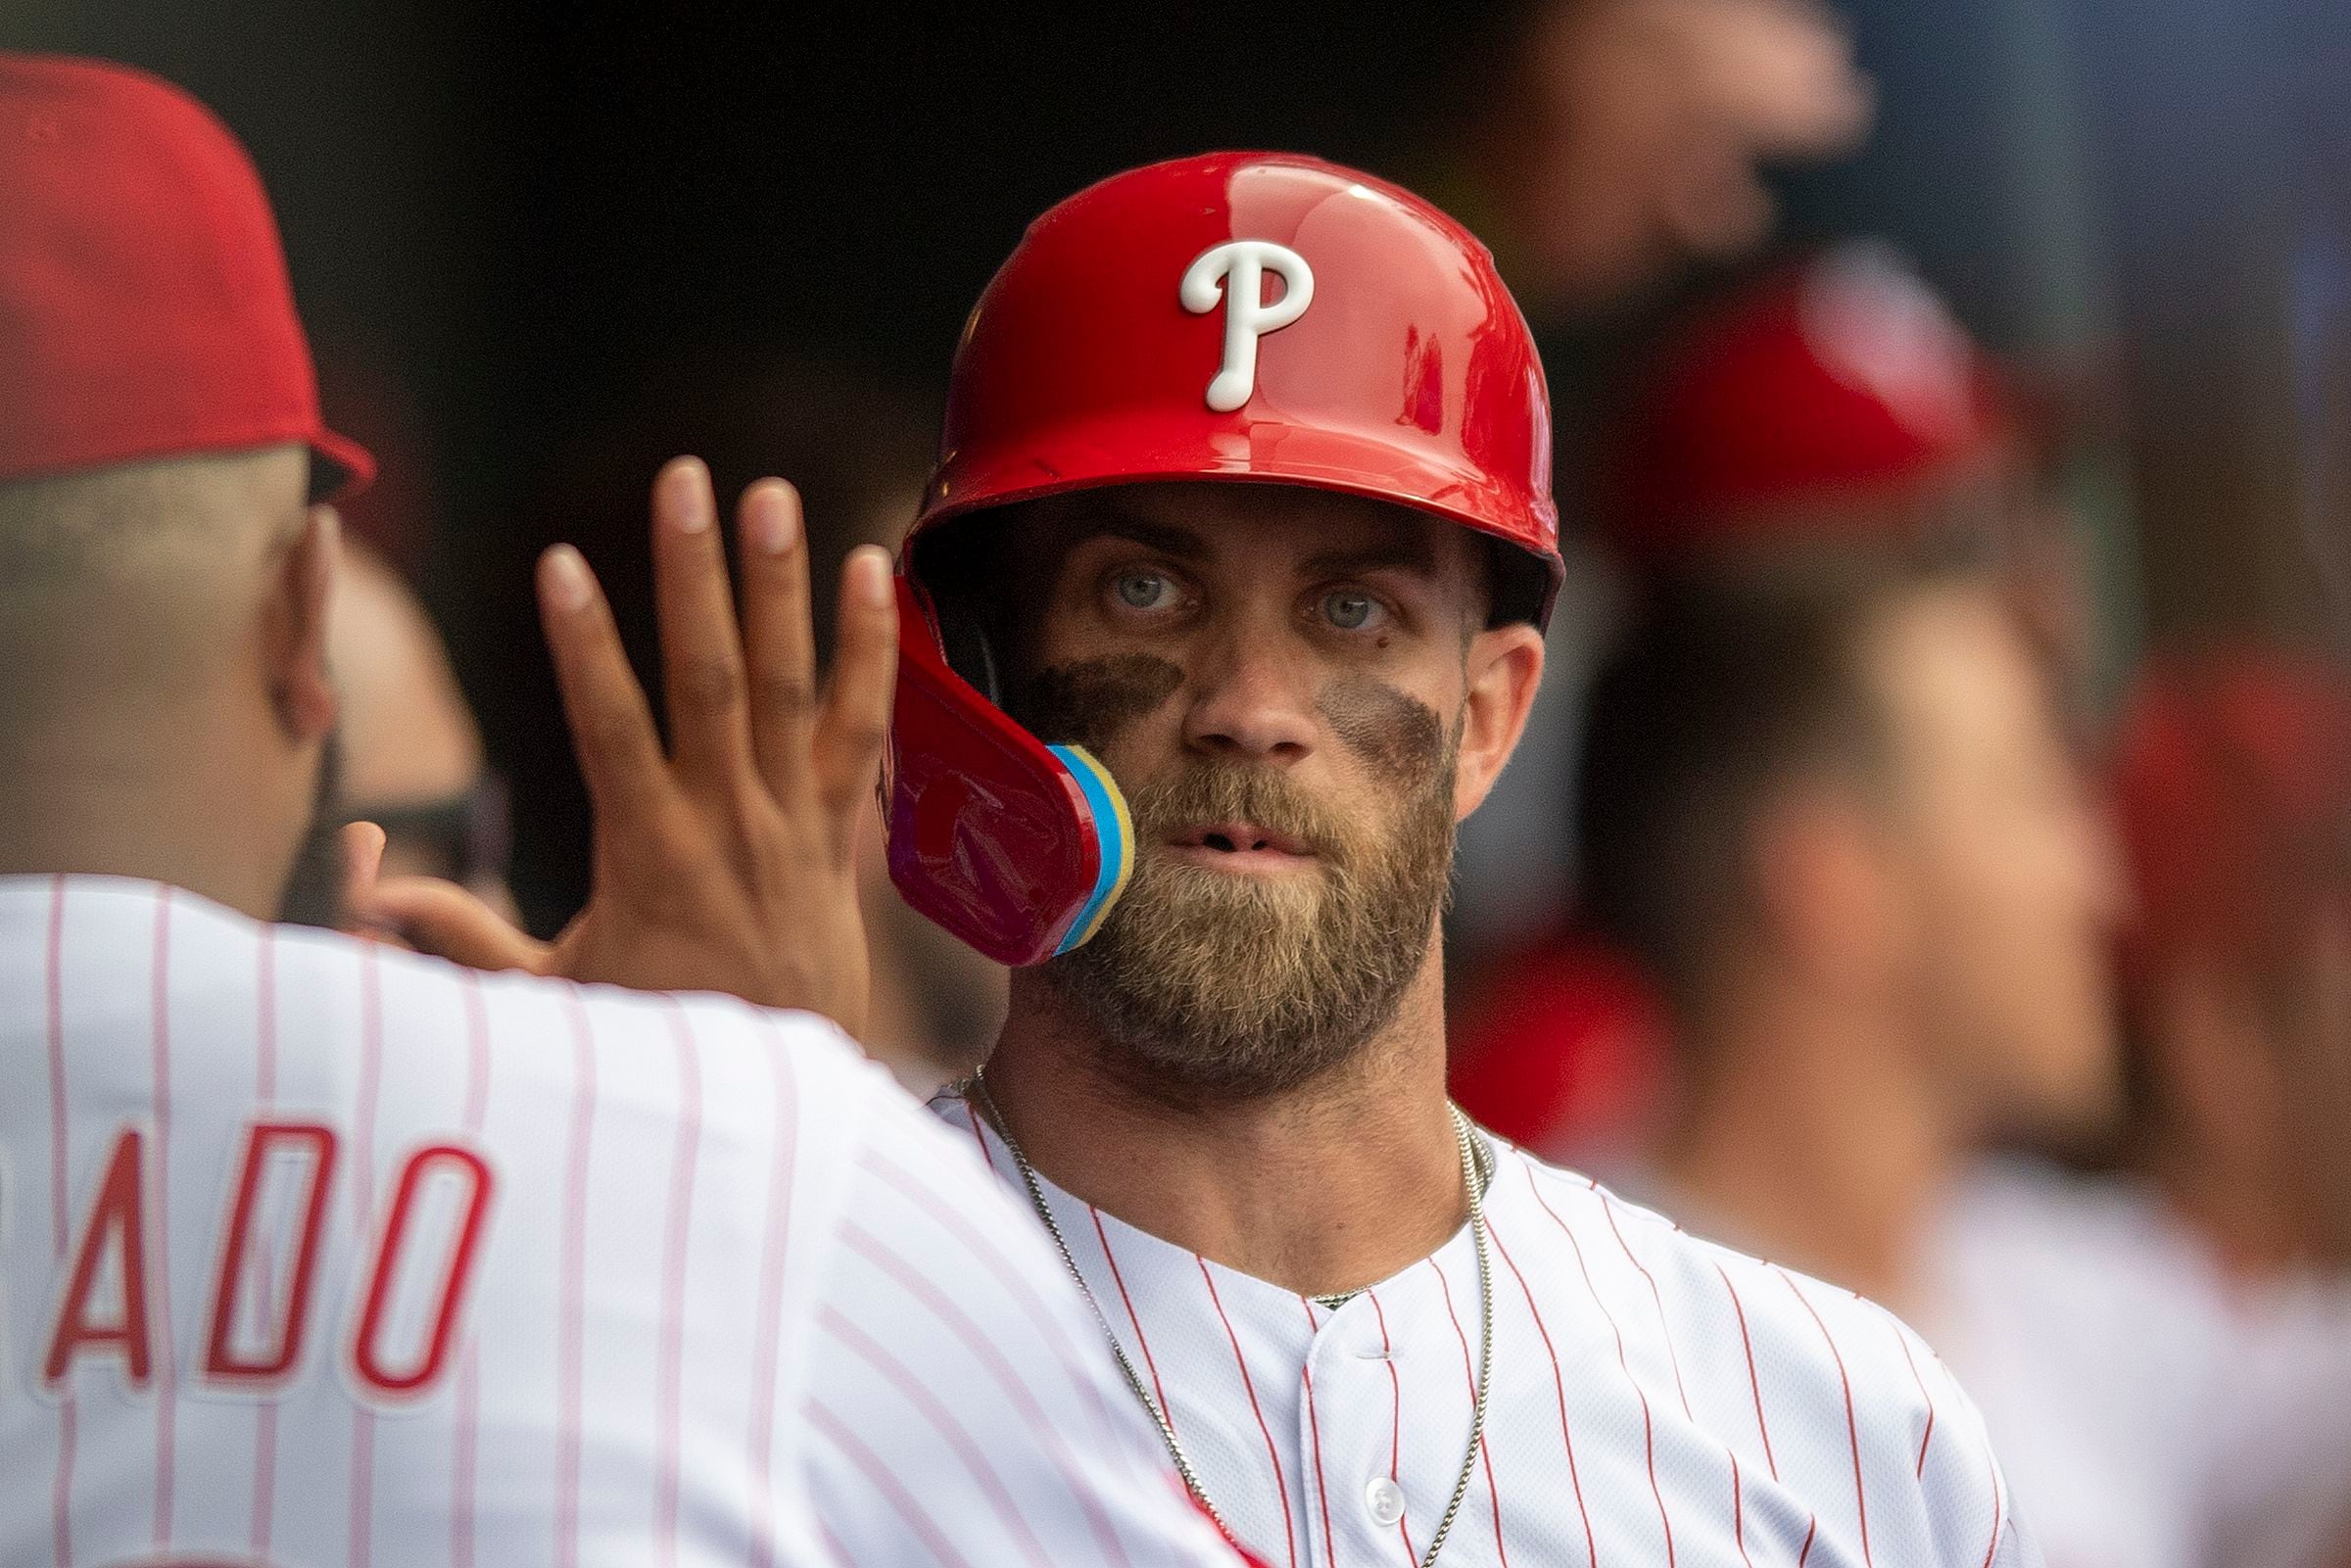 Through 4 years, who has been better — Bryce Harper or Manny